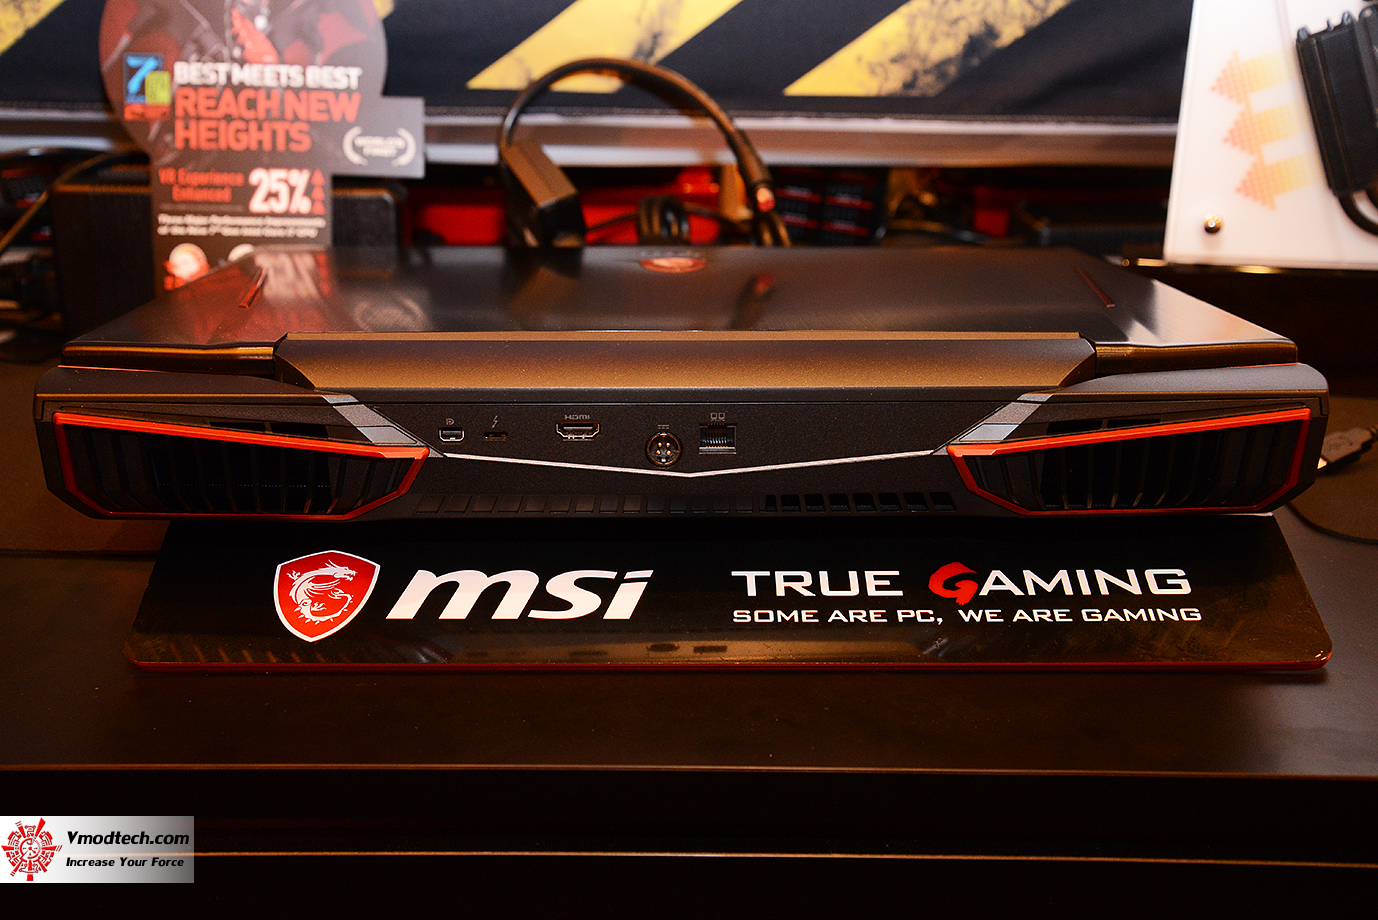 dsc 2029 MSI GAMING NOTEBOOK CES2017 LAS VEGAS PREVIEW